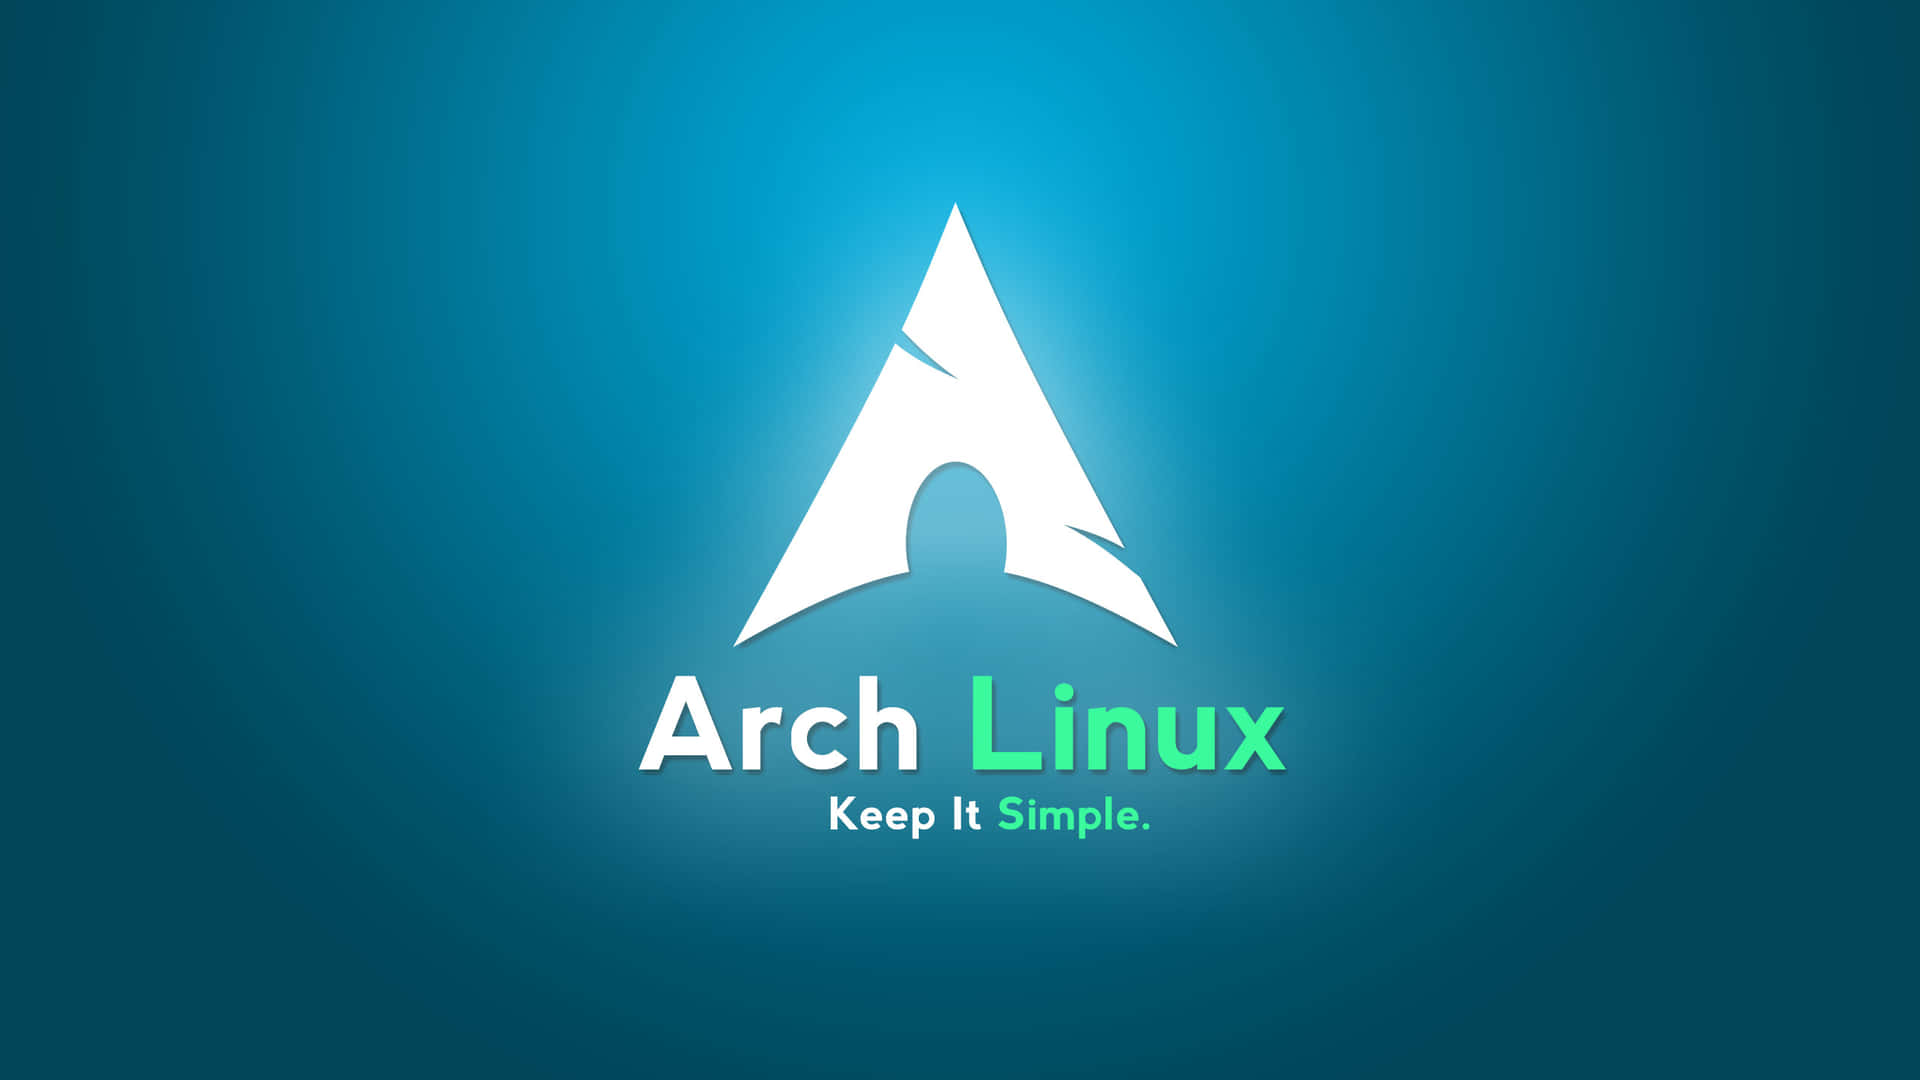 Arch Linux Wallpaper on 2560x1440 Display Wallpaper